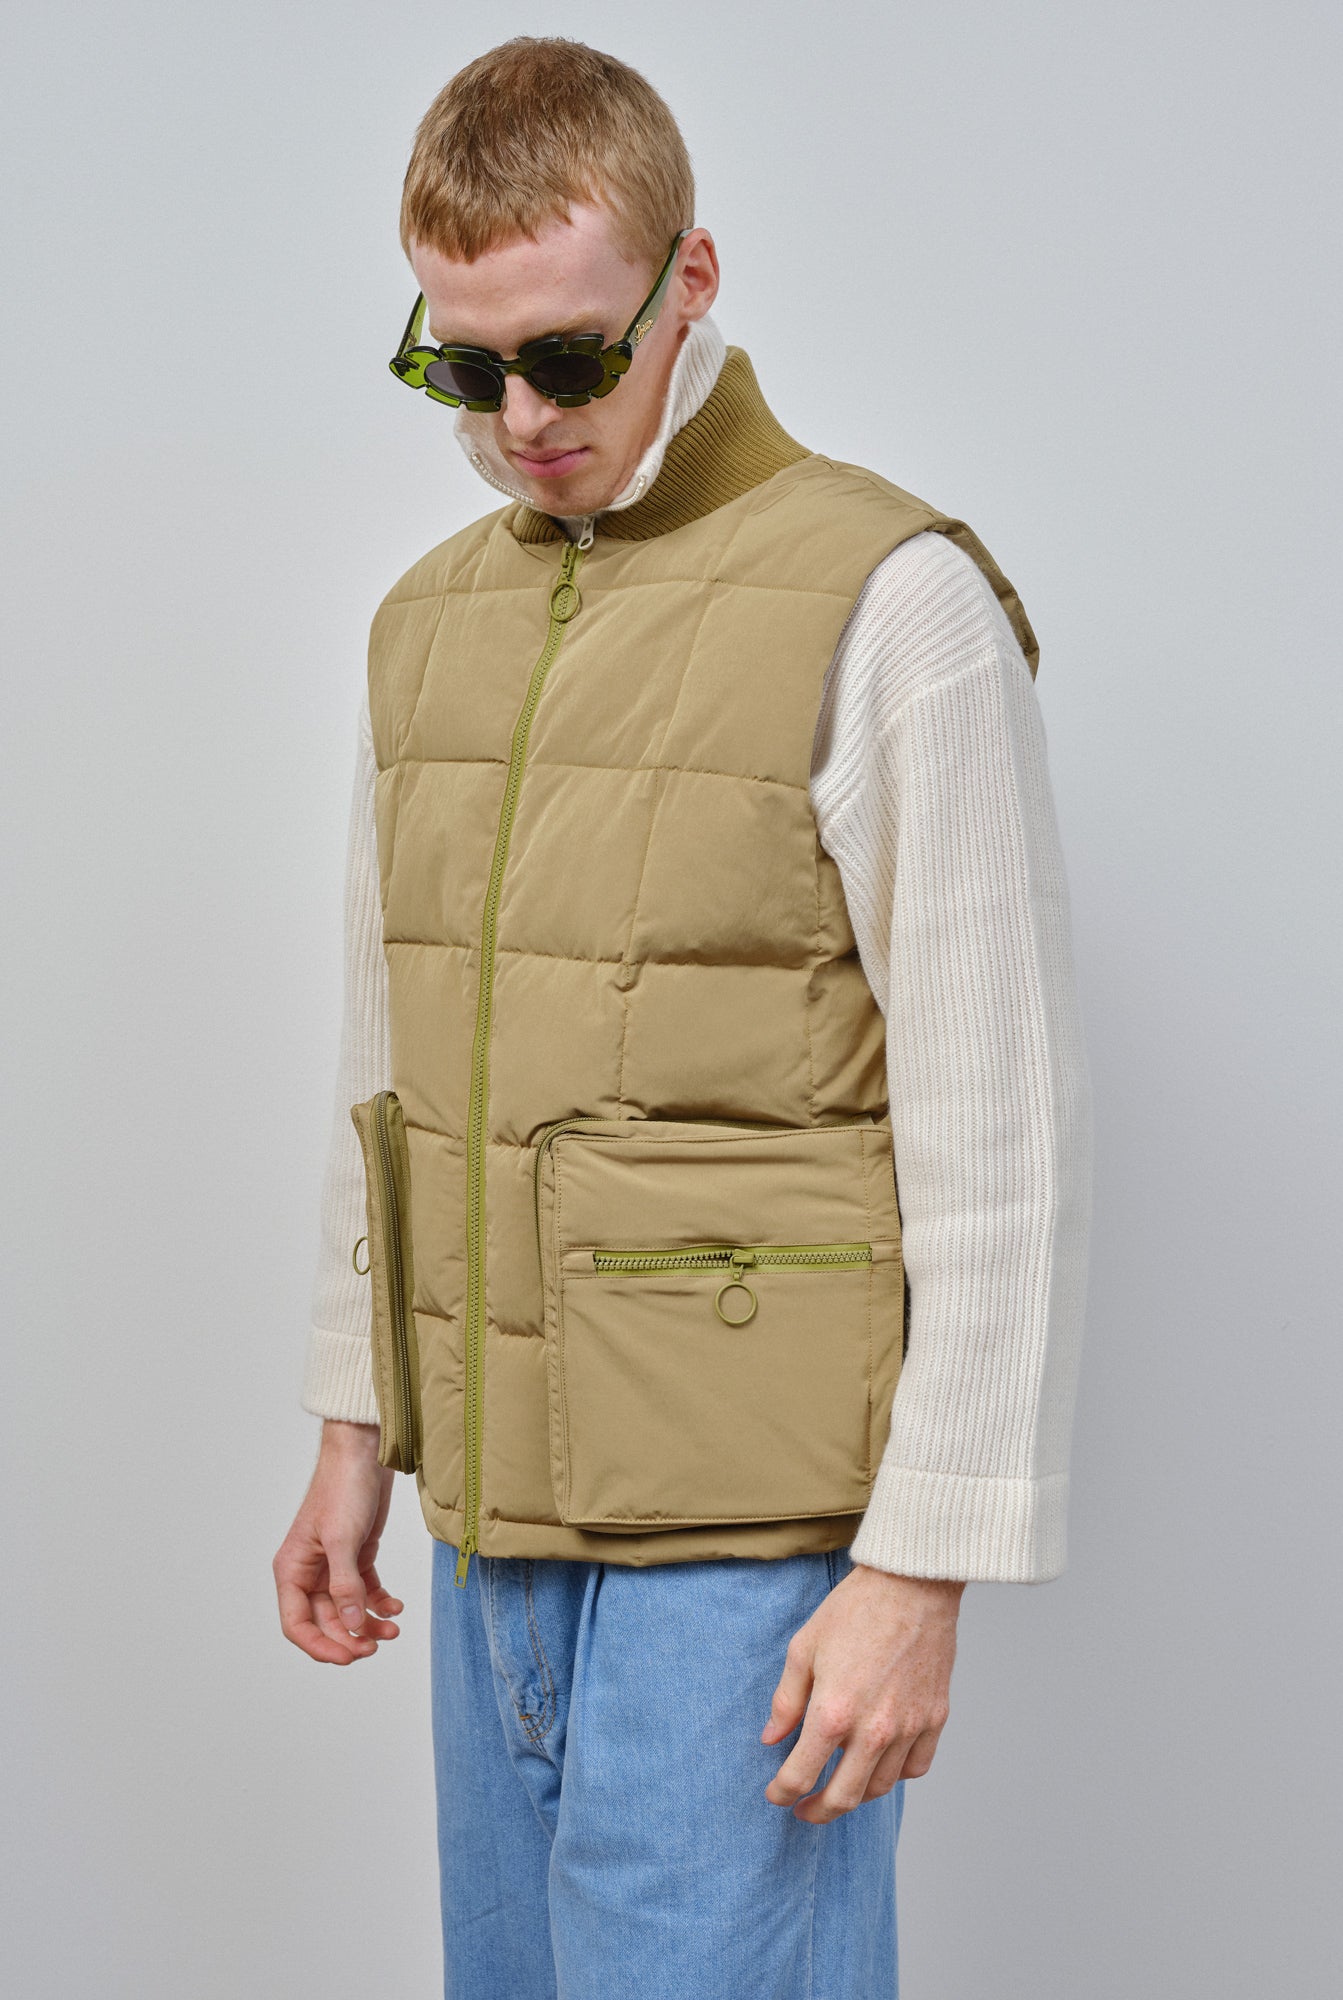 Embassy-of-Bricks-and-Logs-OUTLET-SALE-WARWICK-PUFFER-VEST-Jacken-Mantel-ARCHIVE-COLLECTION-3_173fbafc-b301-4b07-b4e4-46fc5870acf9.jpg